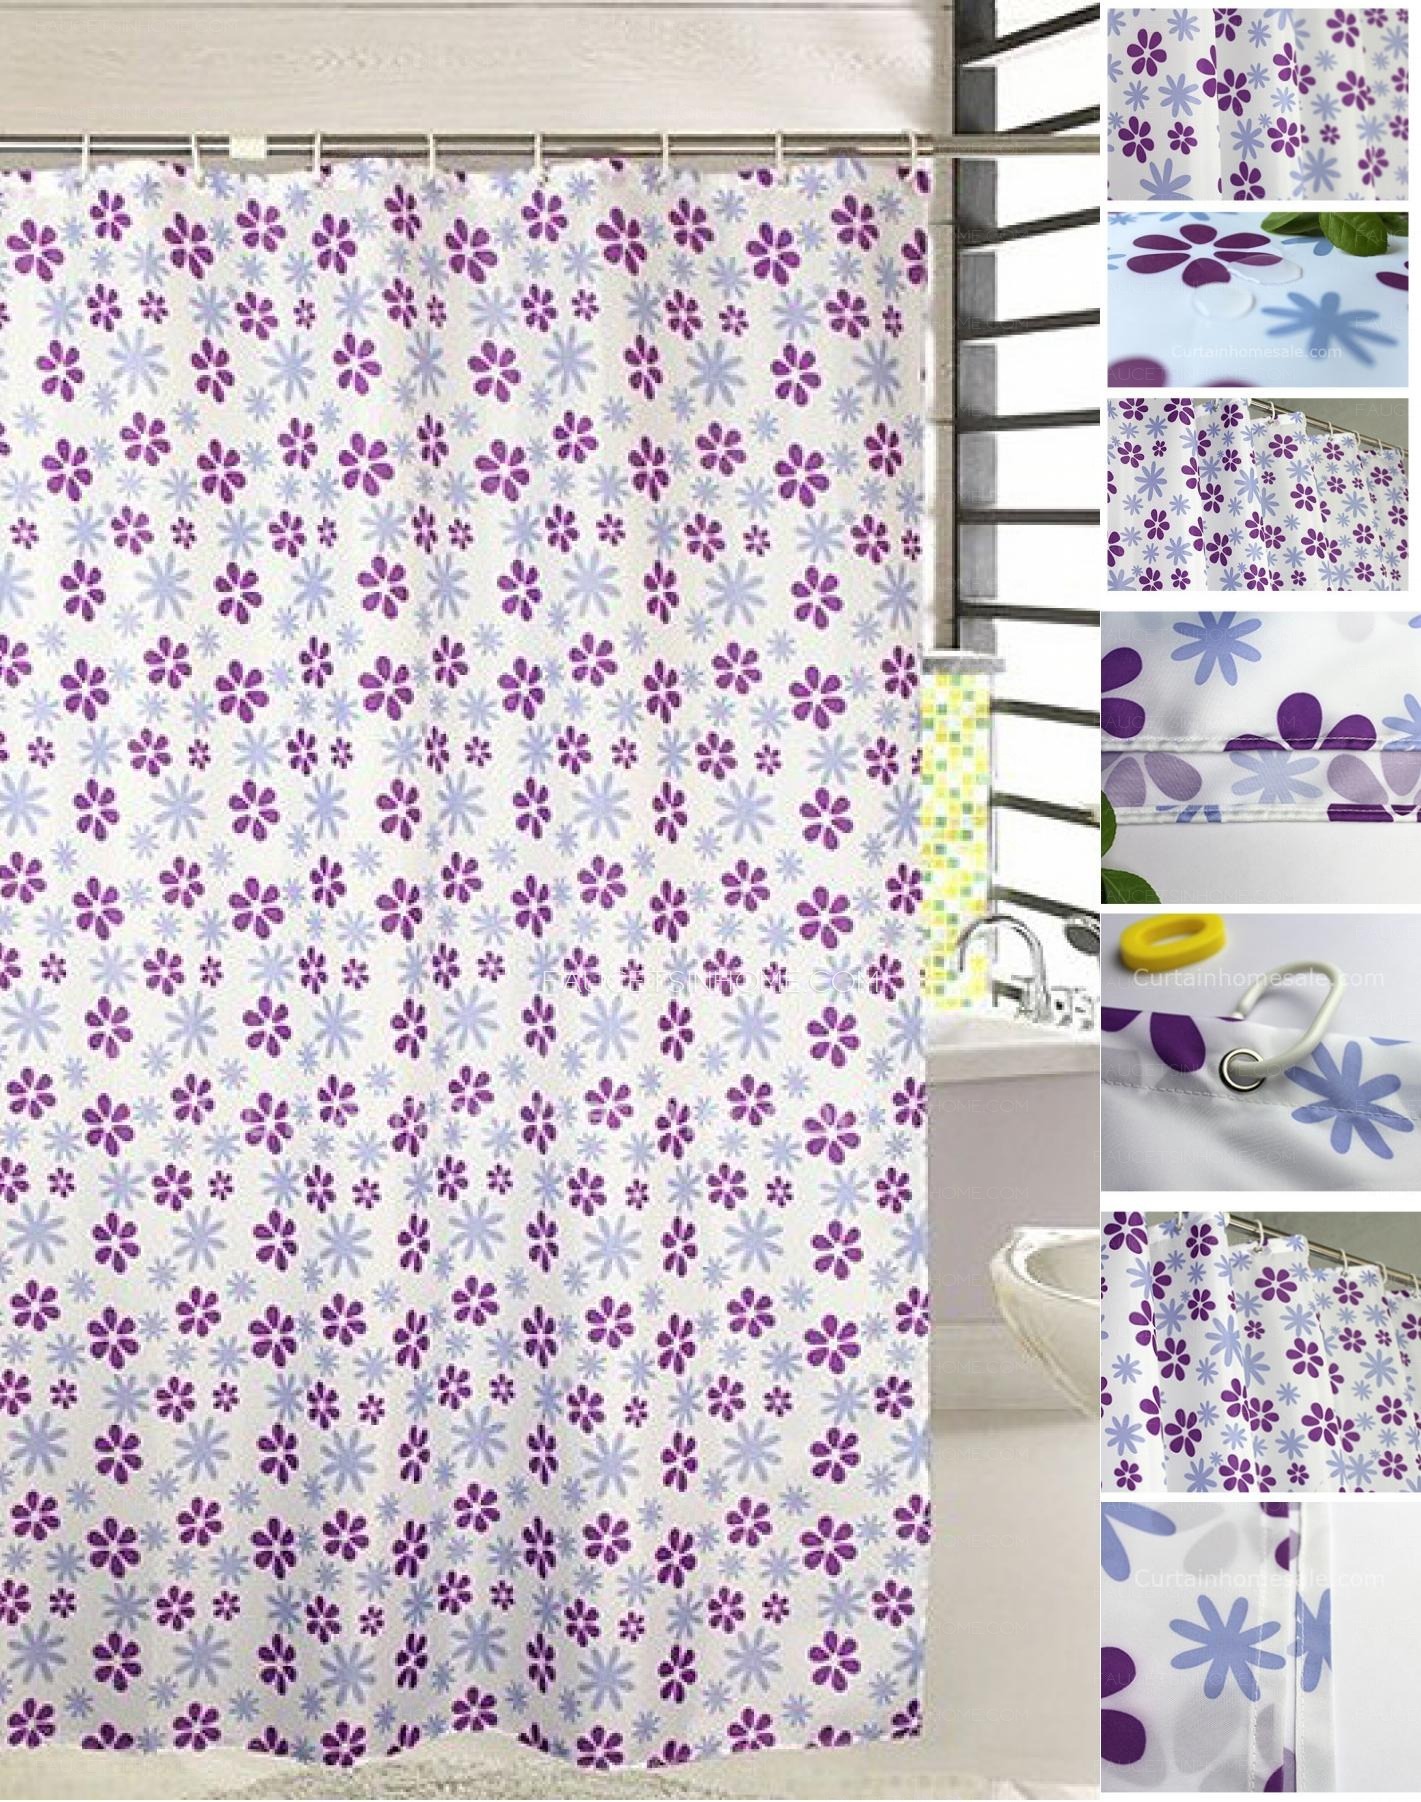 Japanese Purple Floral Unique Shower Curtain And Waterproof